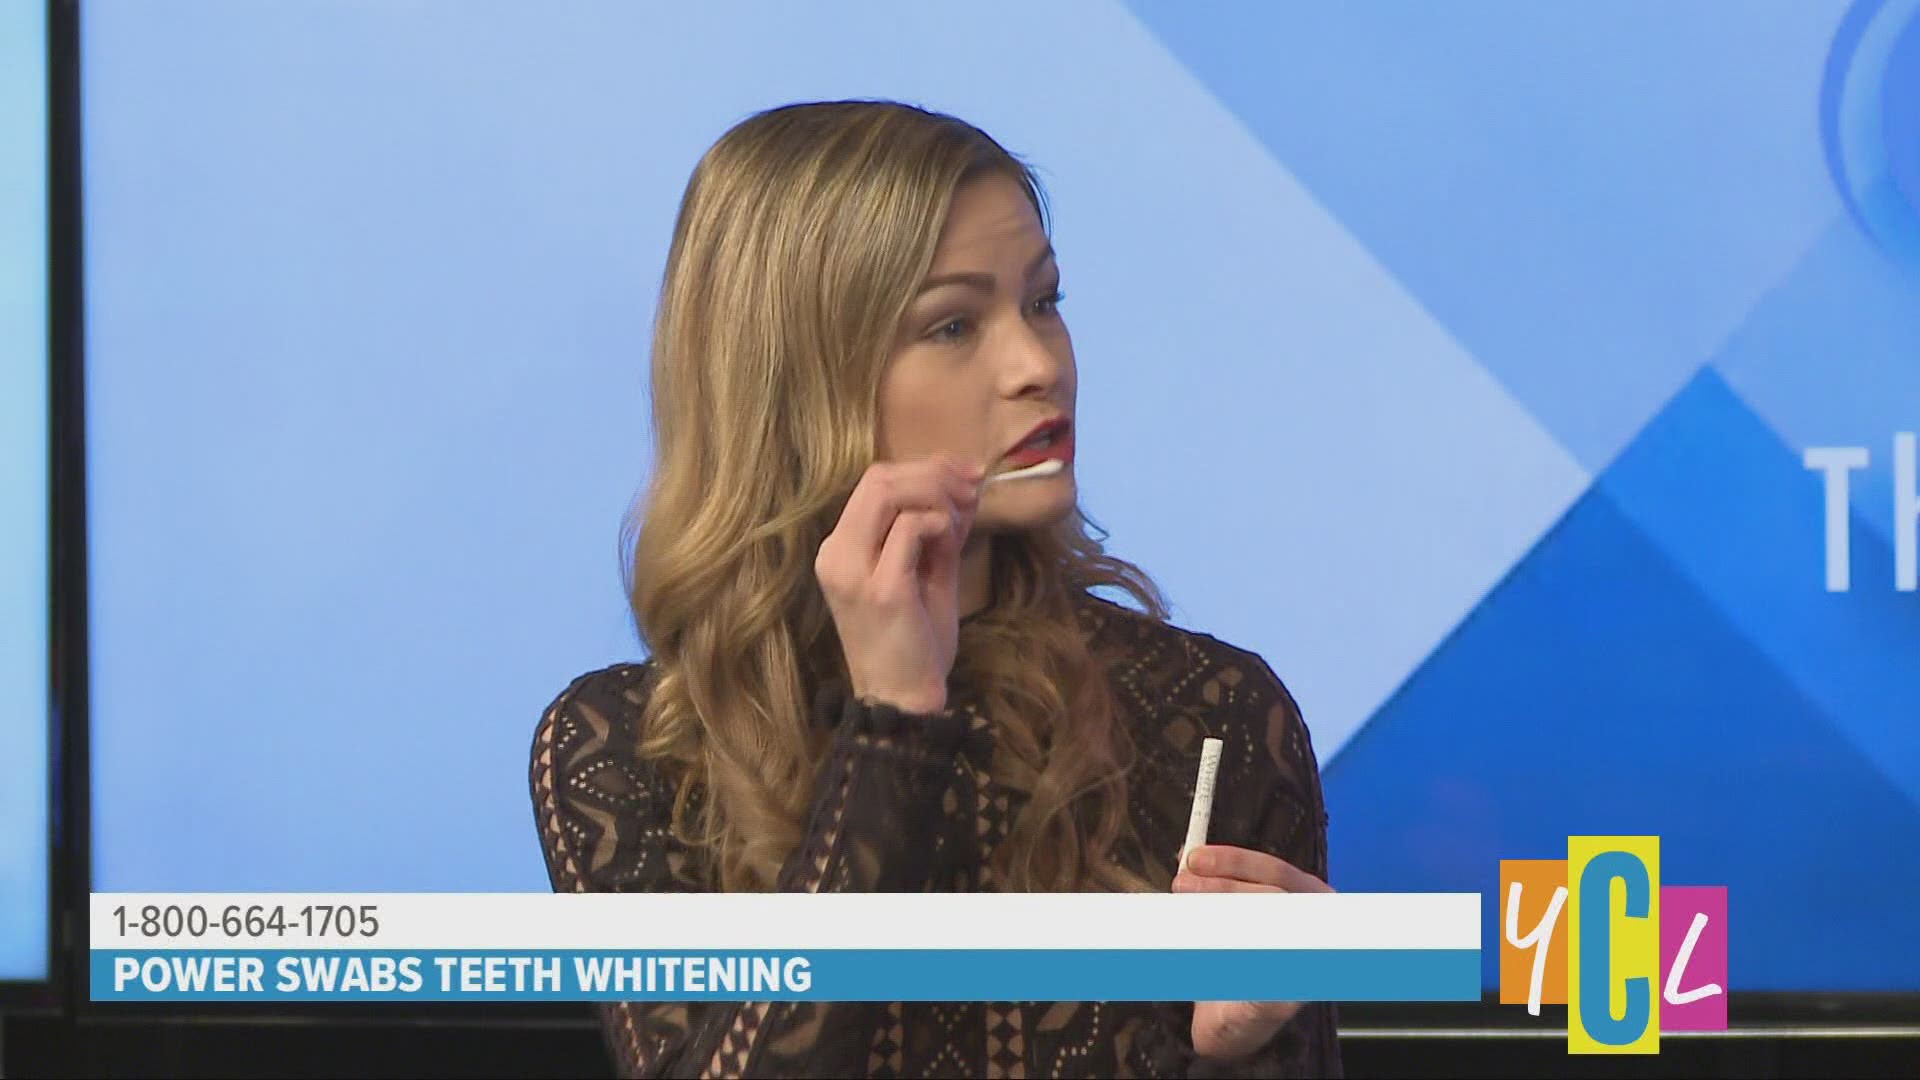 Learn how power swabs could help get you achieve a whiter, brighter smile in just minutes! The following is a paid segment sponsored by True Earth Health Solutions.